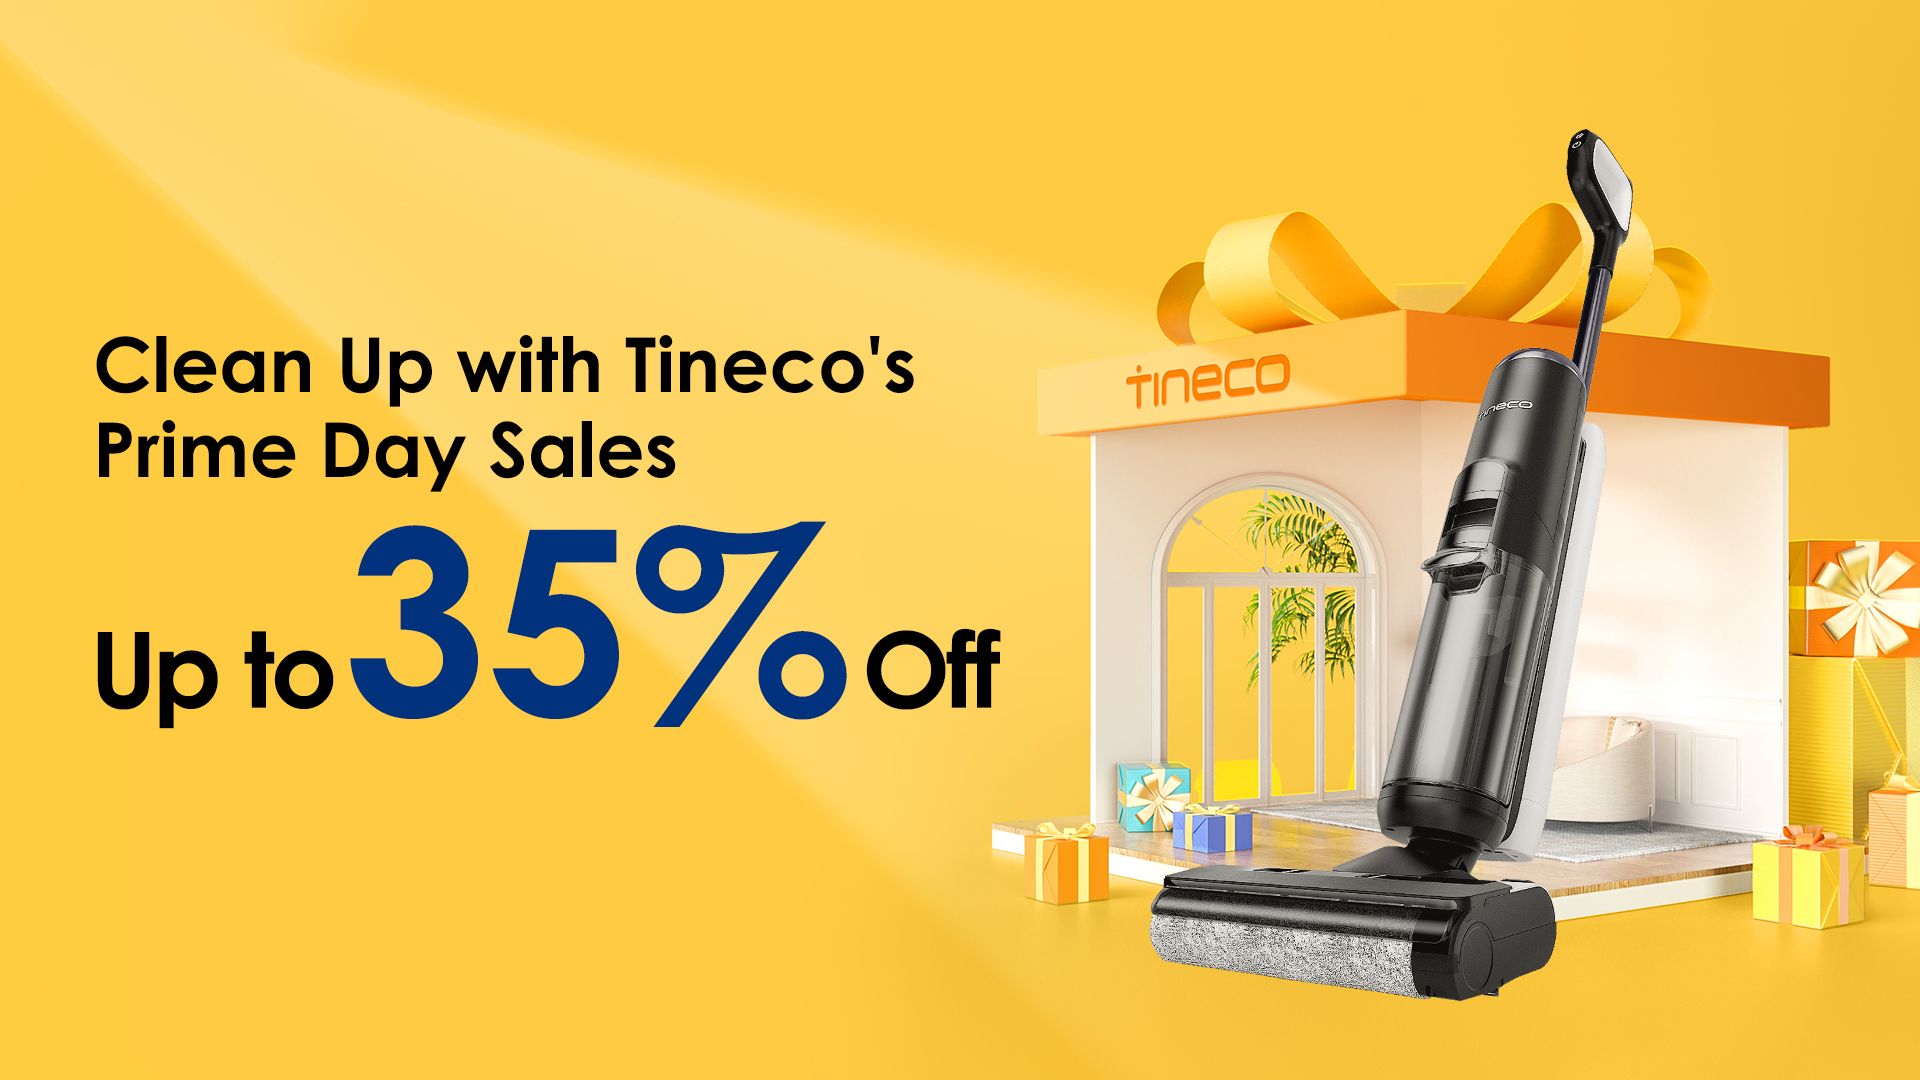 Winter Sale: Save Up to 35% on Tineco Smart Wet-Dry Vacuums